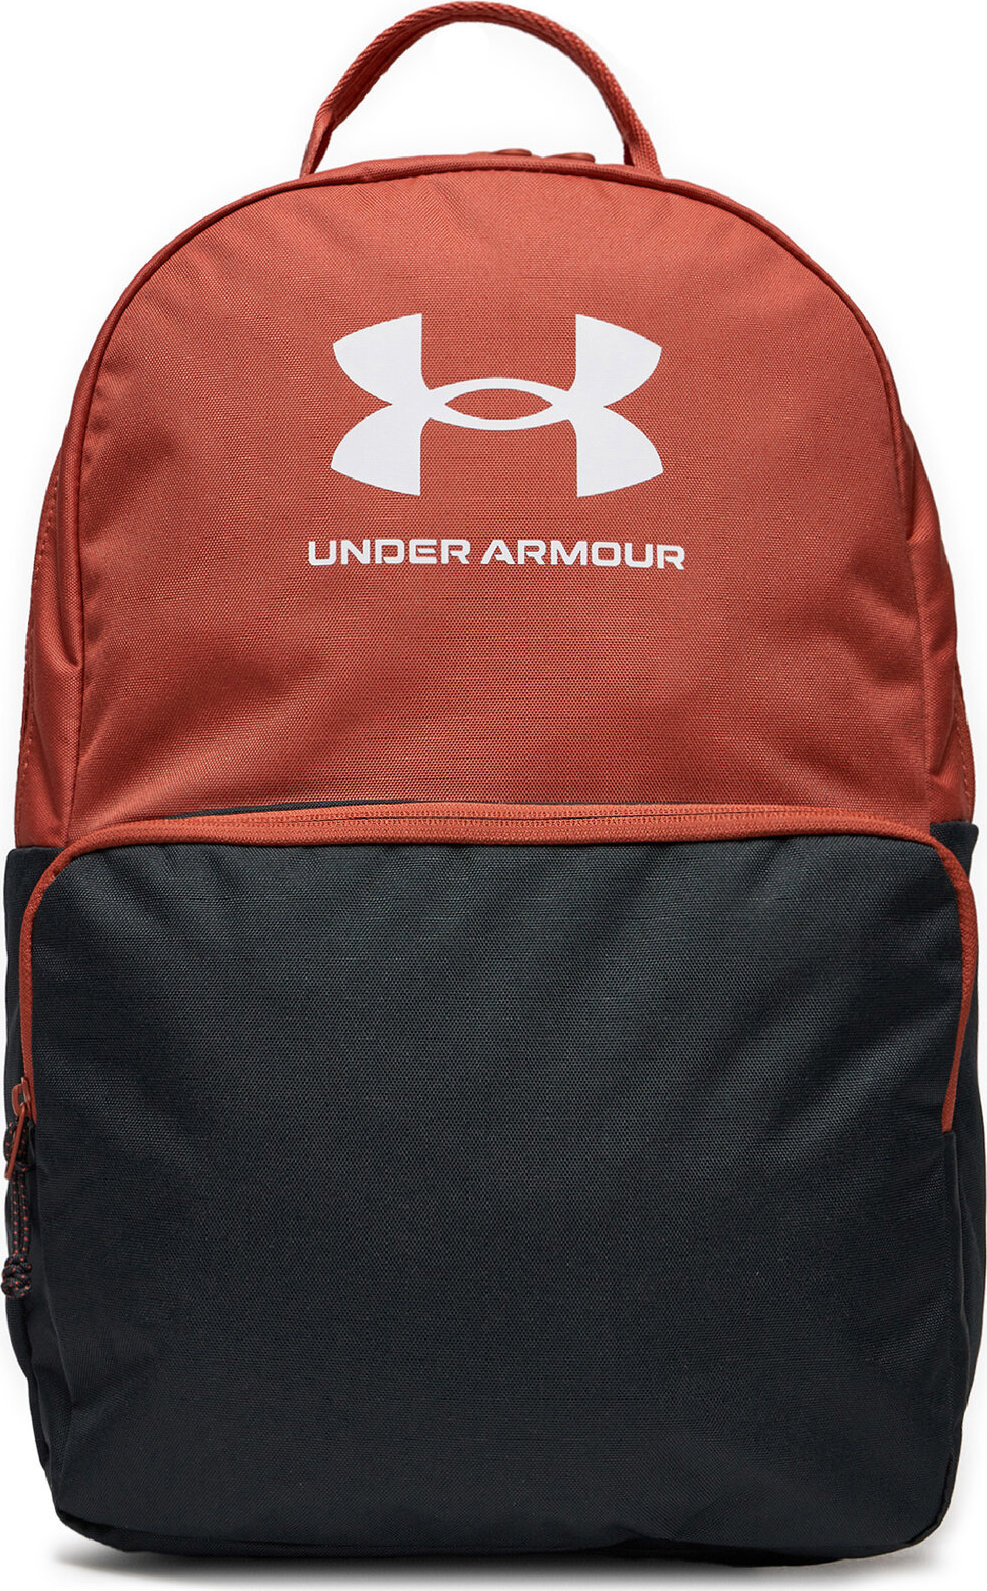 Batoh Under Armour Ua Loudon Backpack 1378415-611 Sedona Red/Anthracite/White